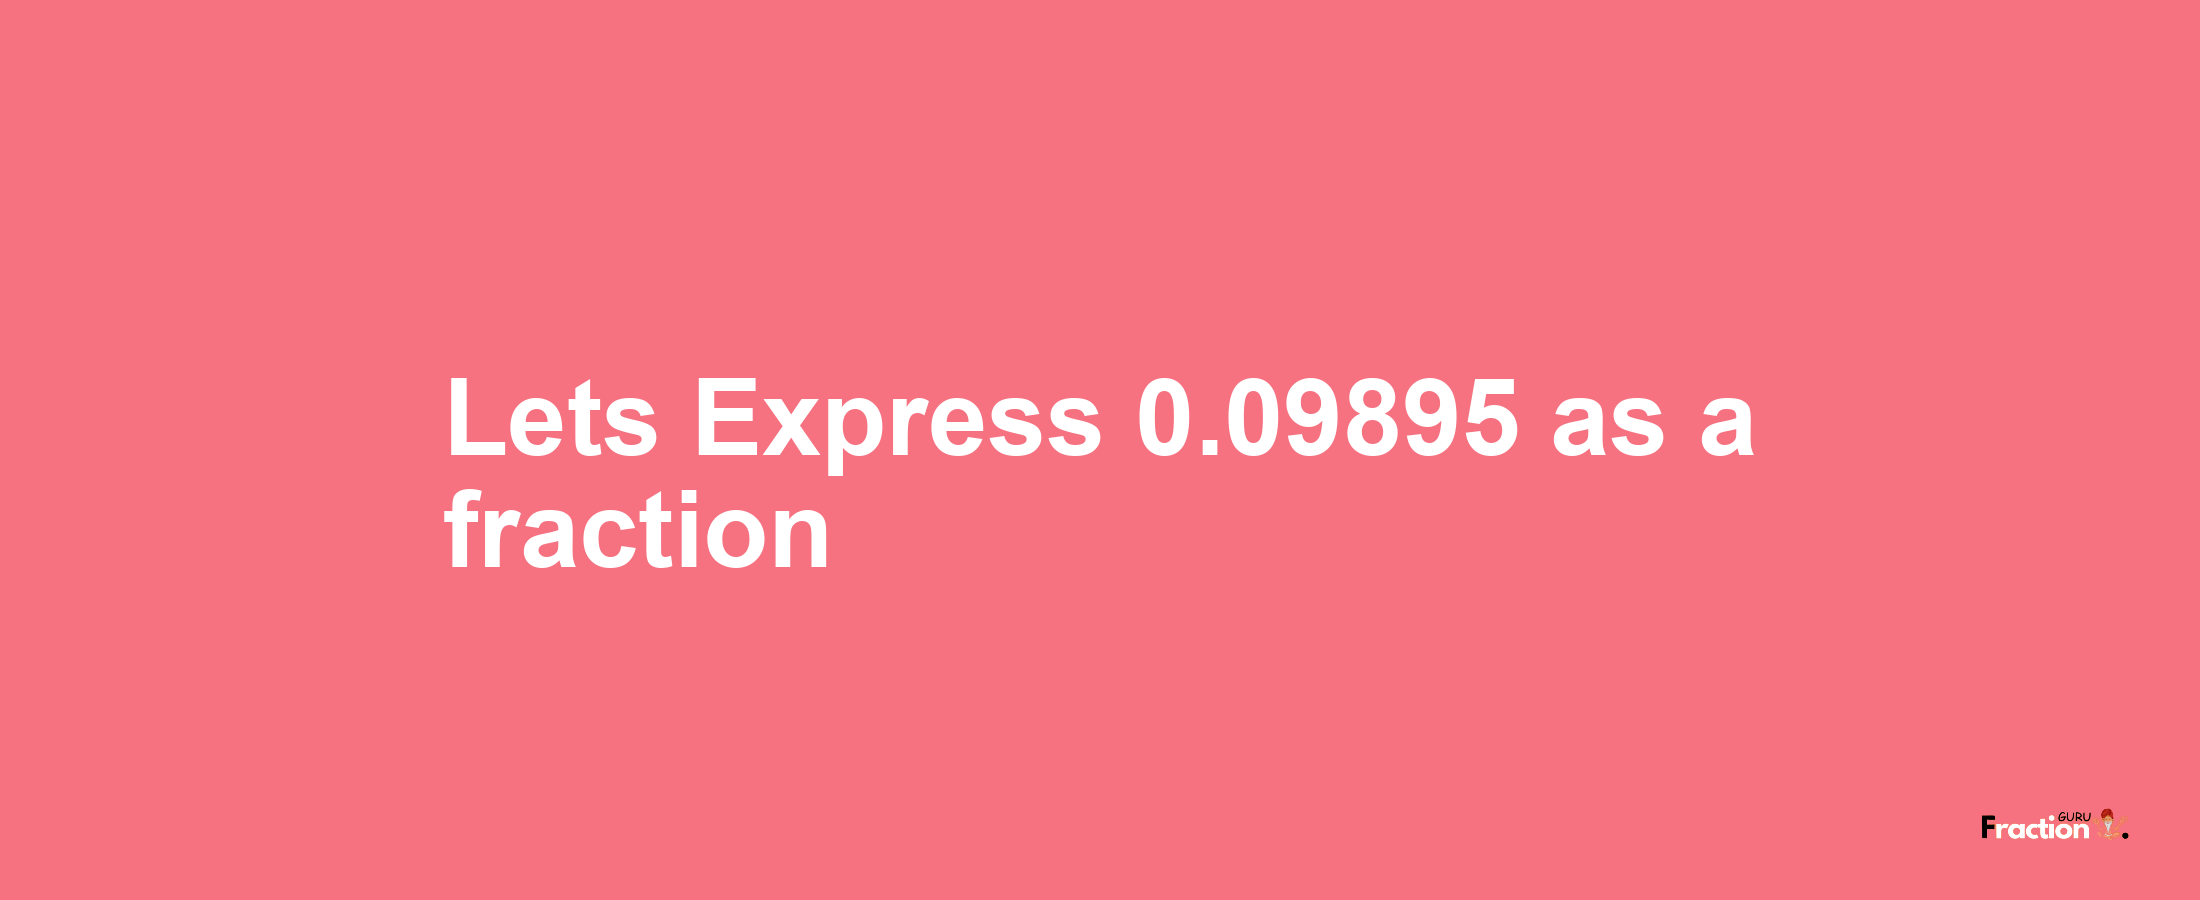 Lets Express 0.09895 as afraction